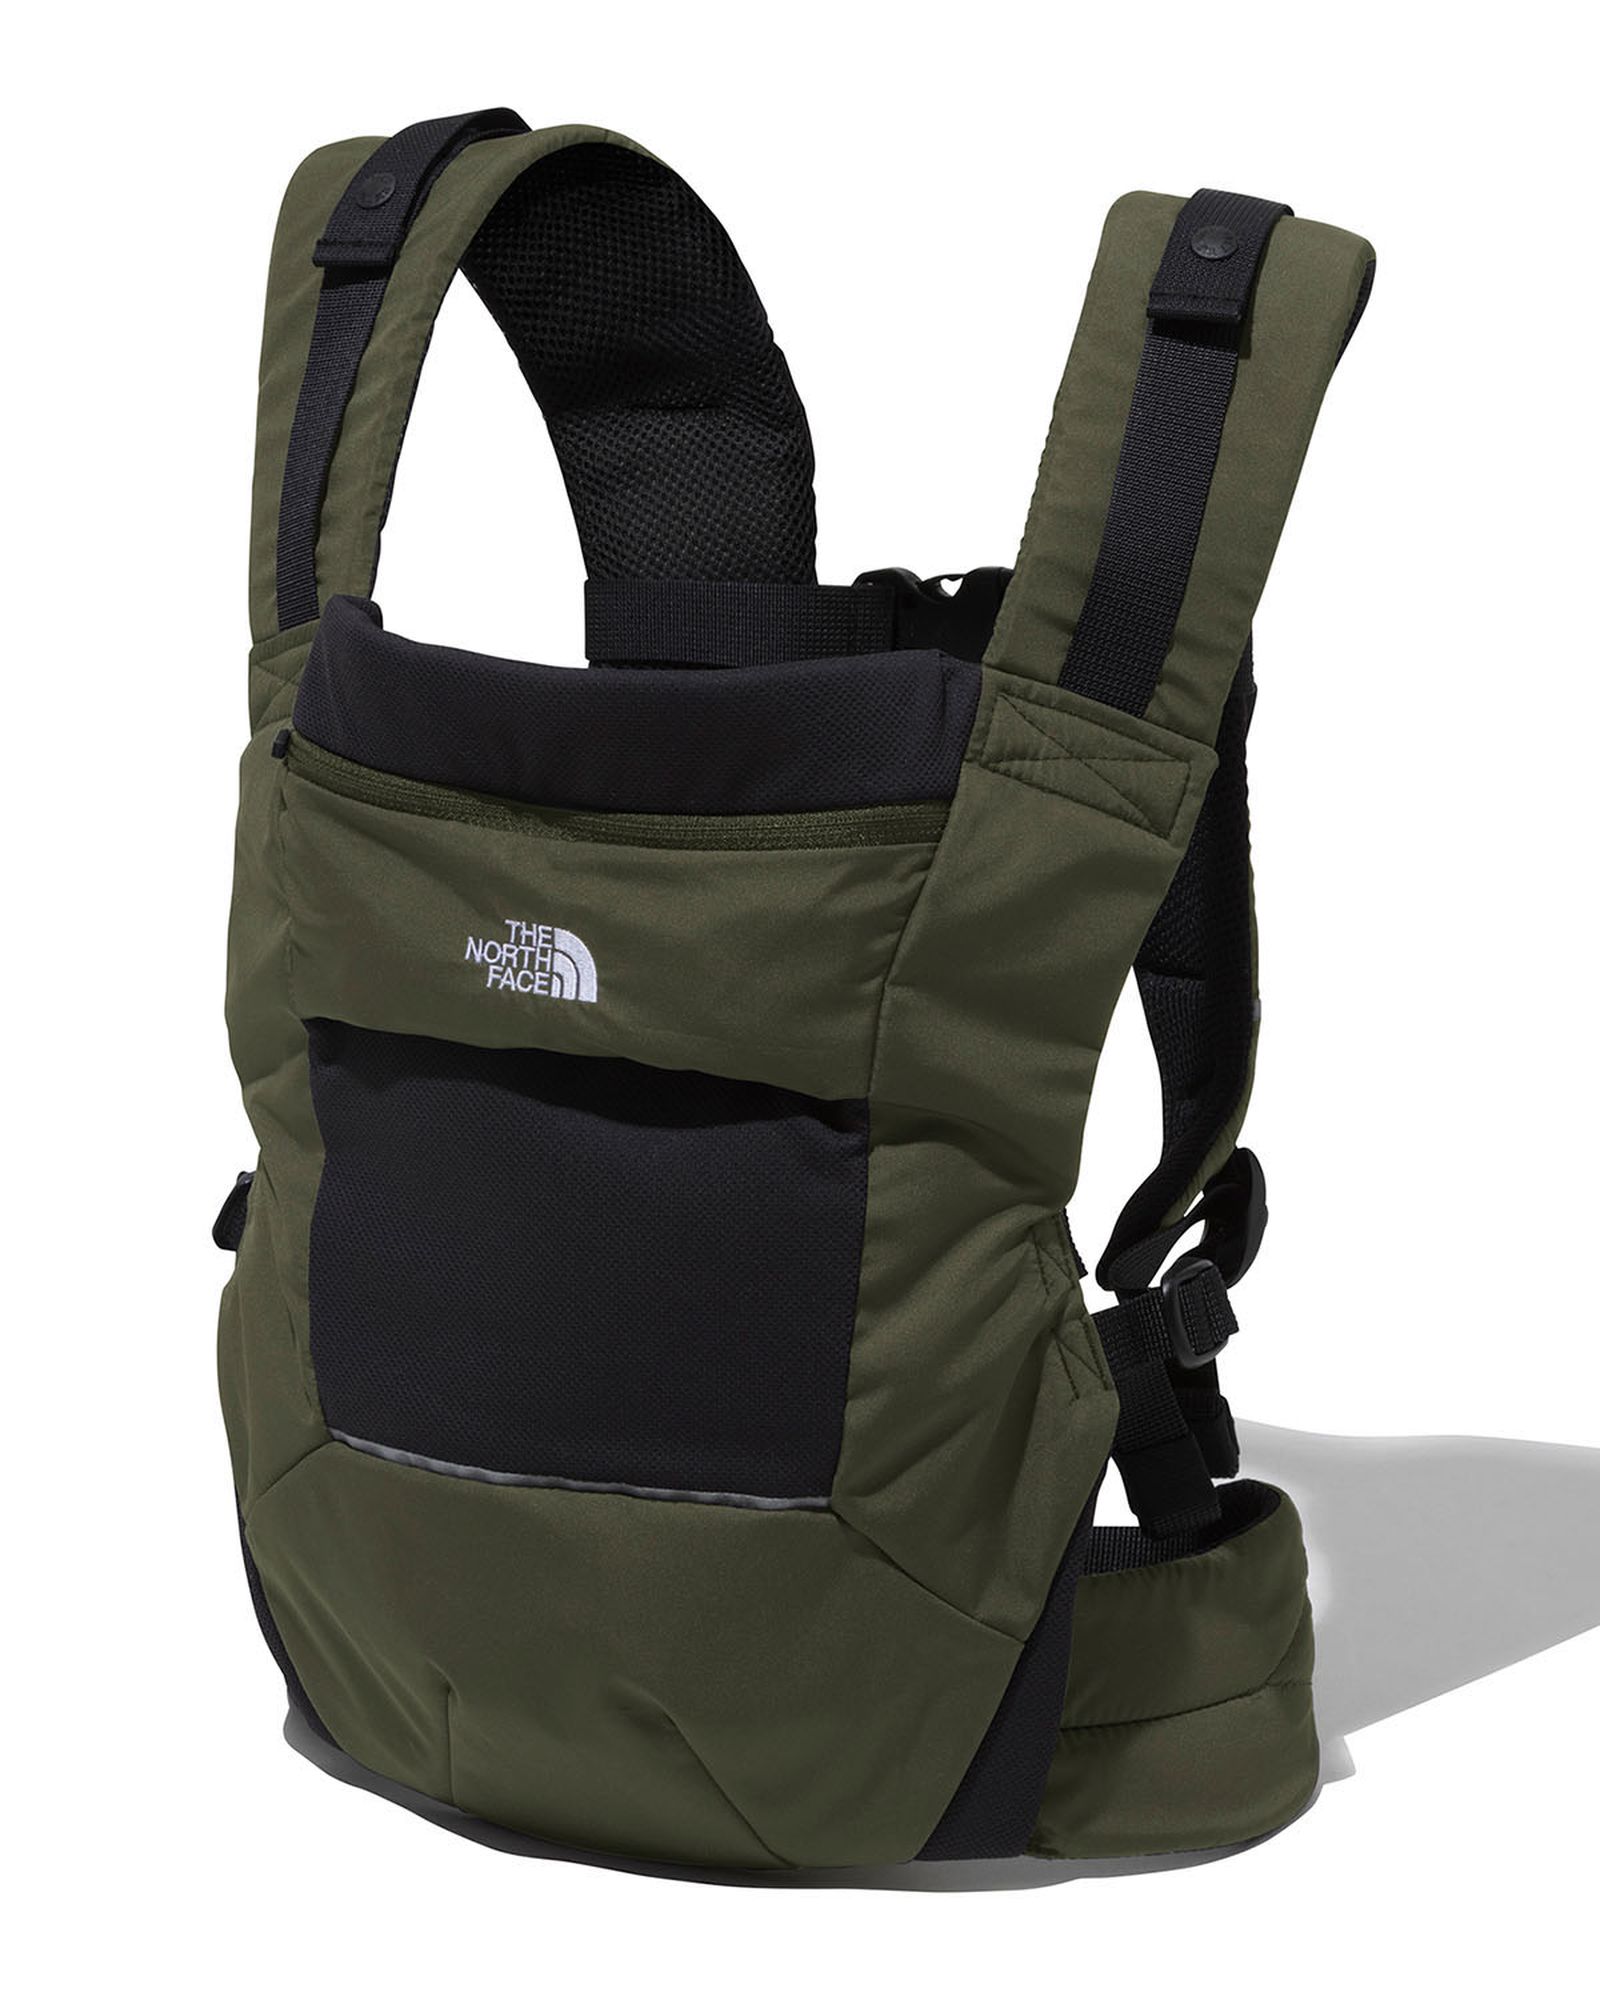 the-north-face-baby-carrier-04